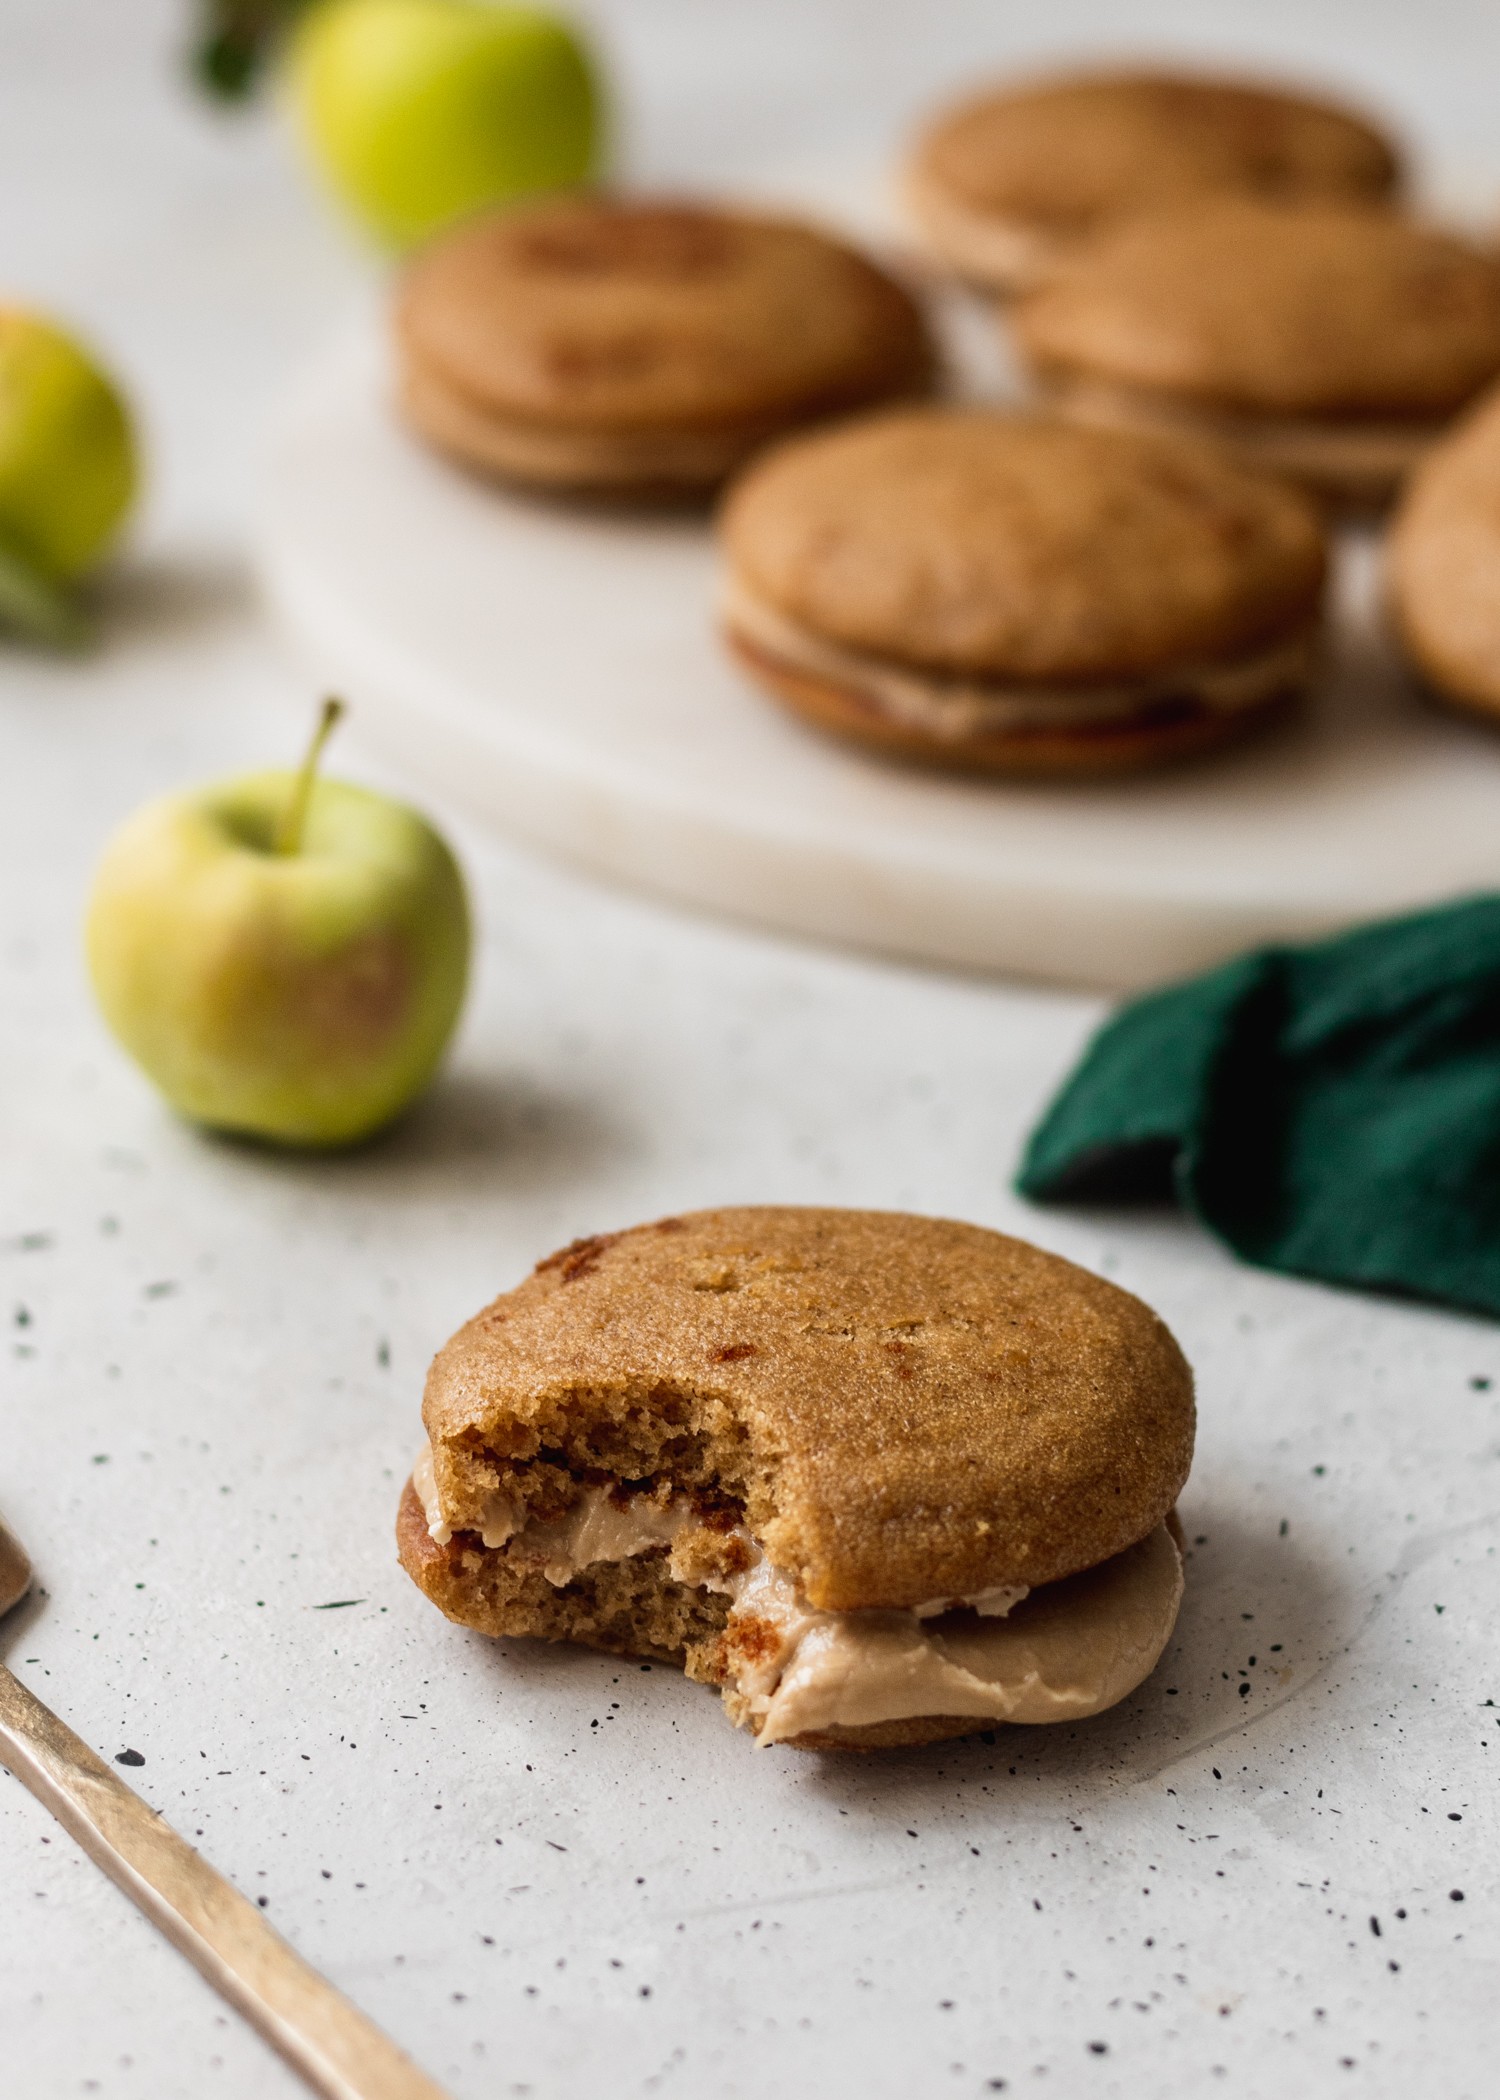 A close up shot of an apple cider whoopie pie with a bite taken out of it sitting on a white speckled table with a plate of apple cider whoopie pies, a green linen, and an apple in the background.